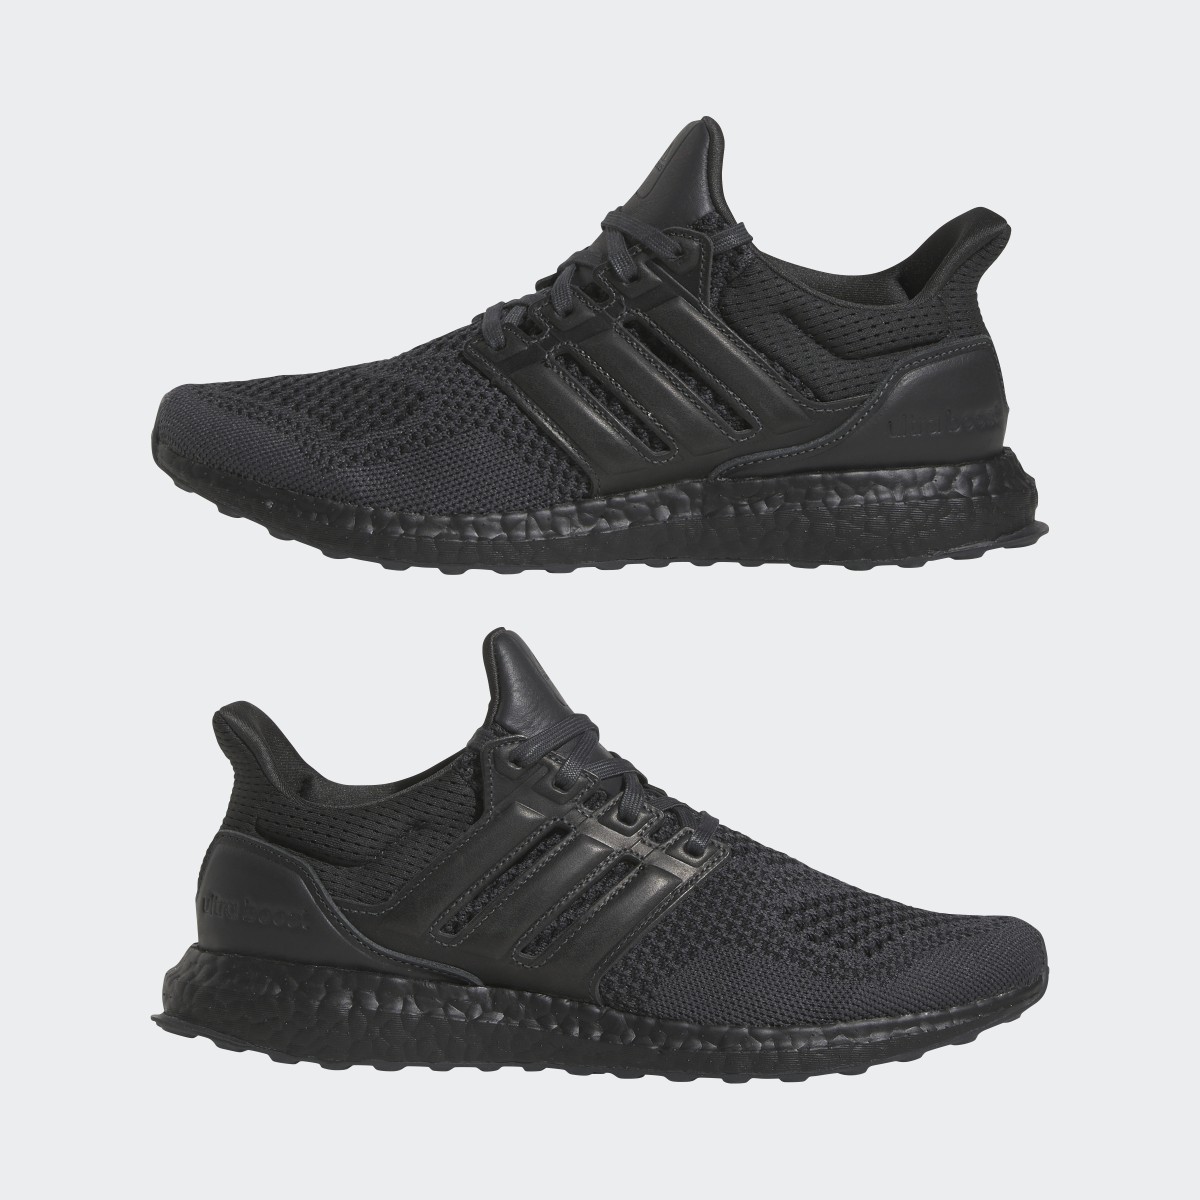 Adidas Ultraboost 1 DNA Shoes. 11